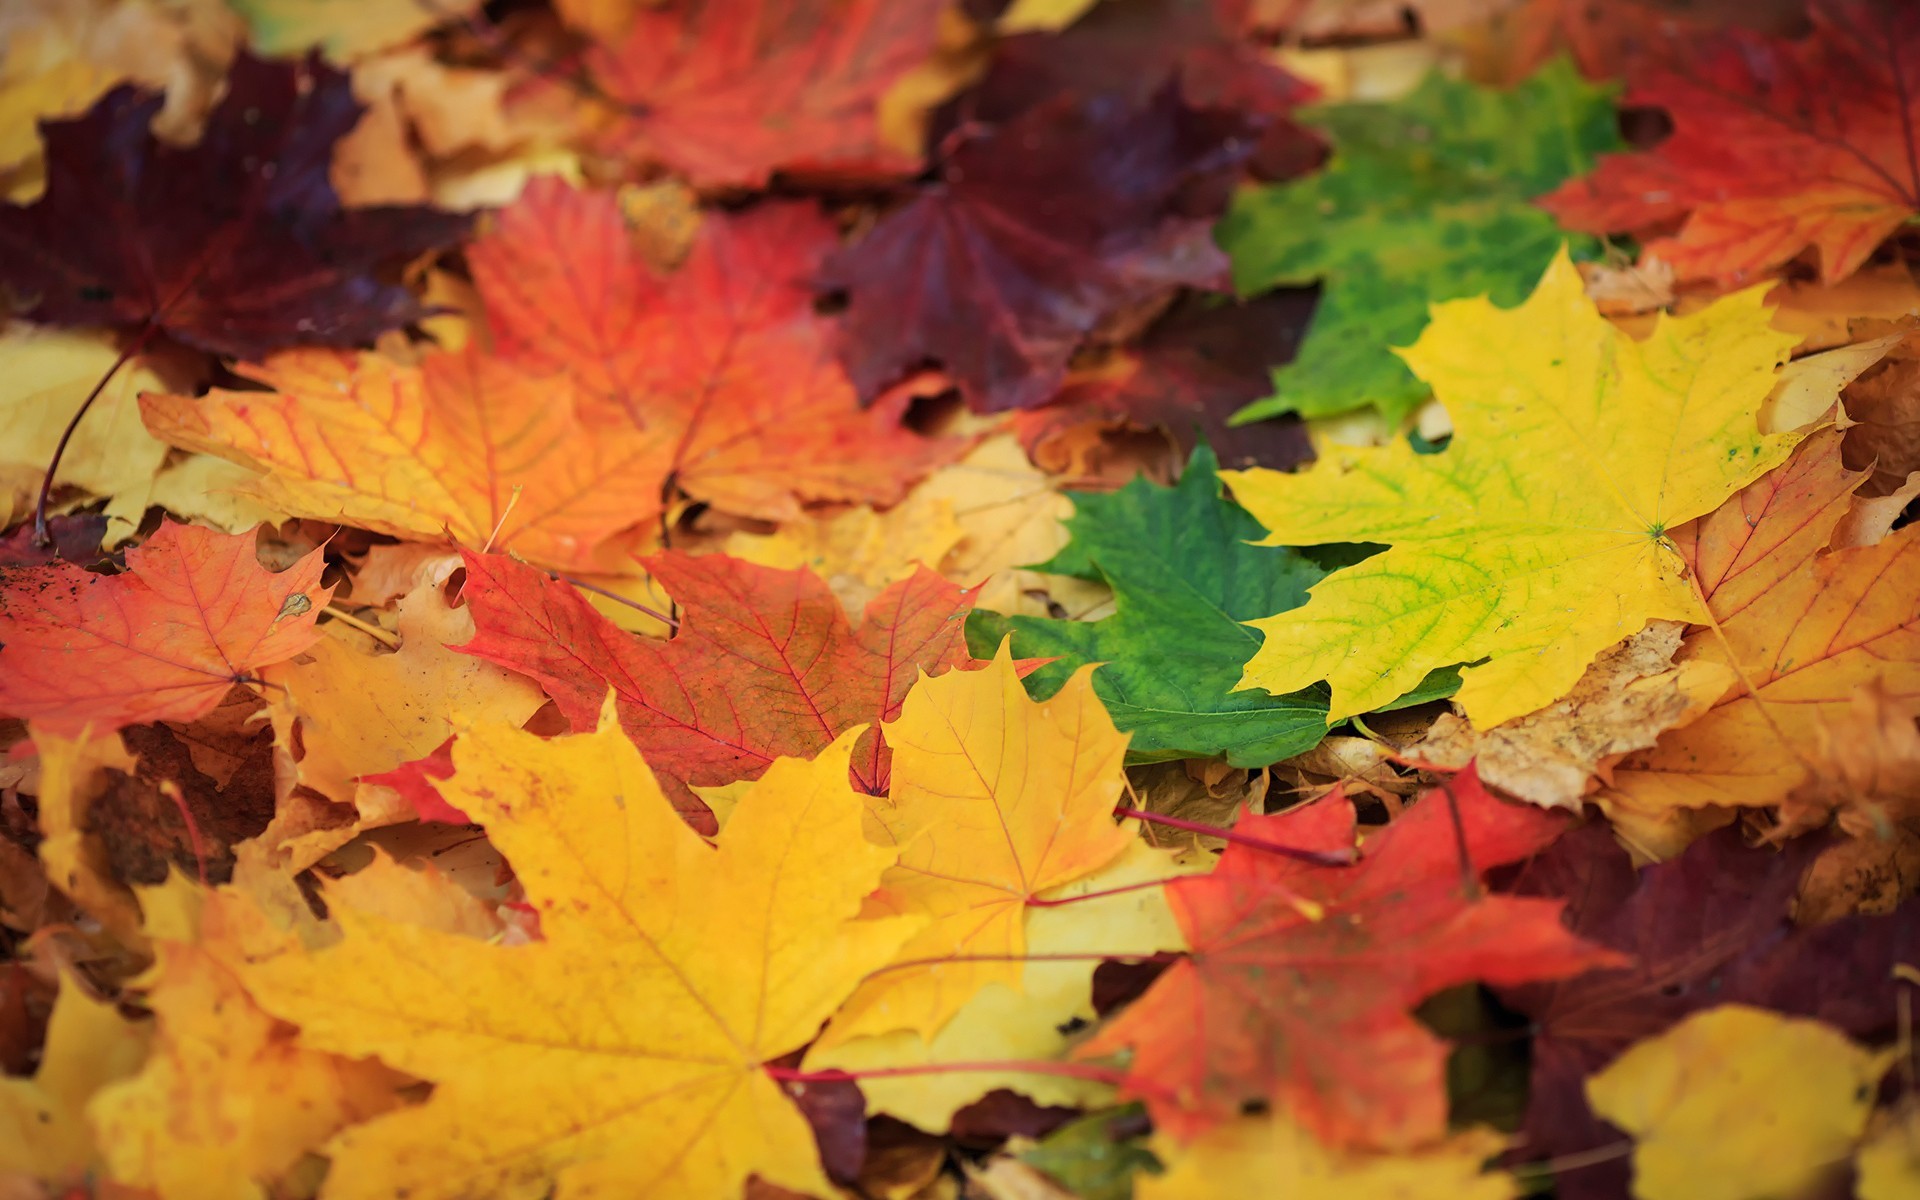 General 1920x1200 plants leaves fall fallen leaves colorful outdoors